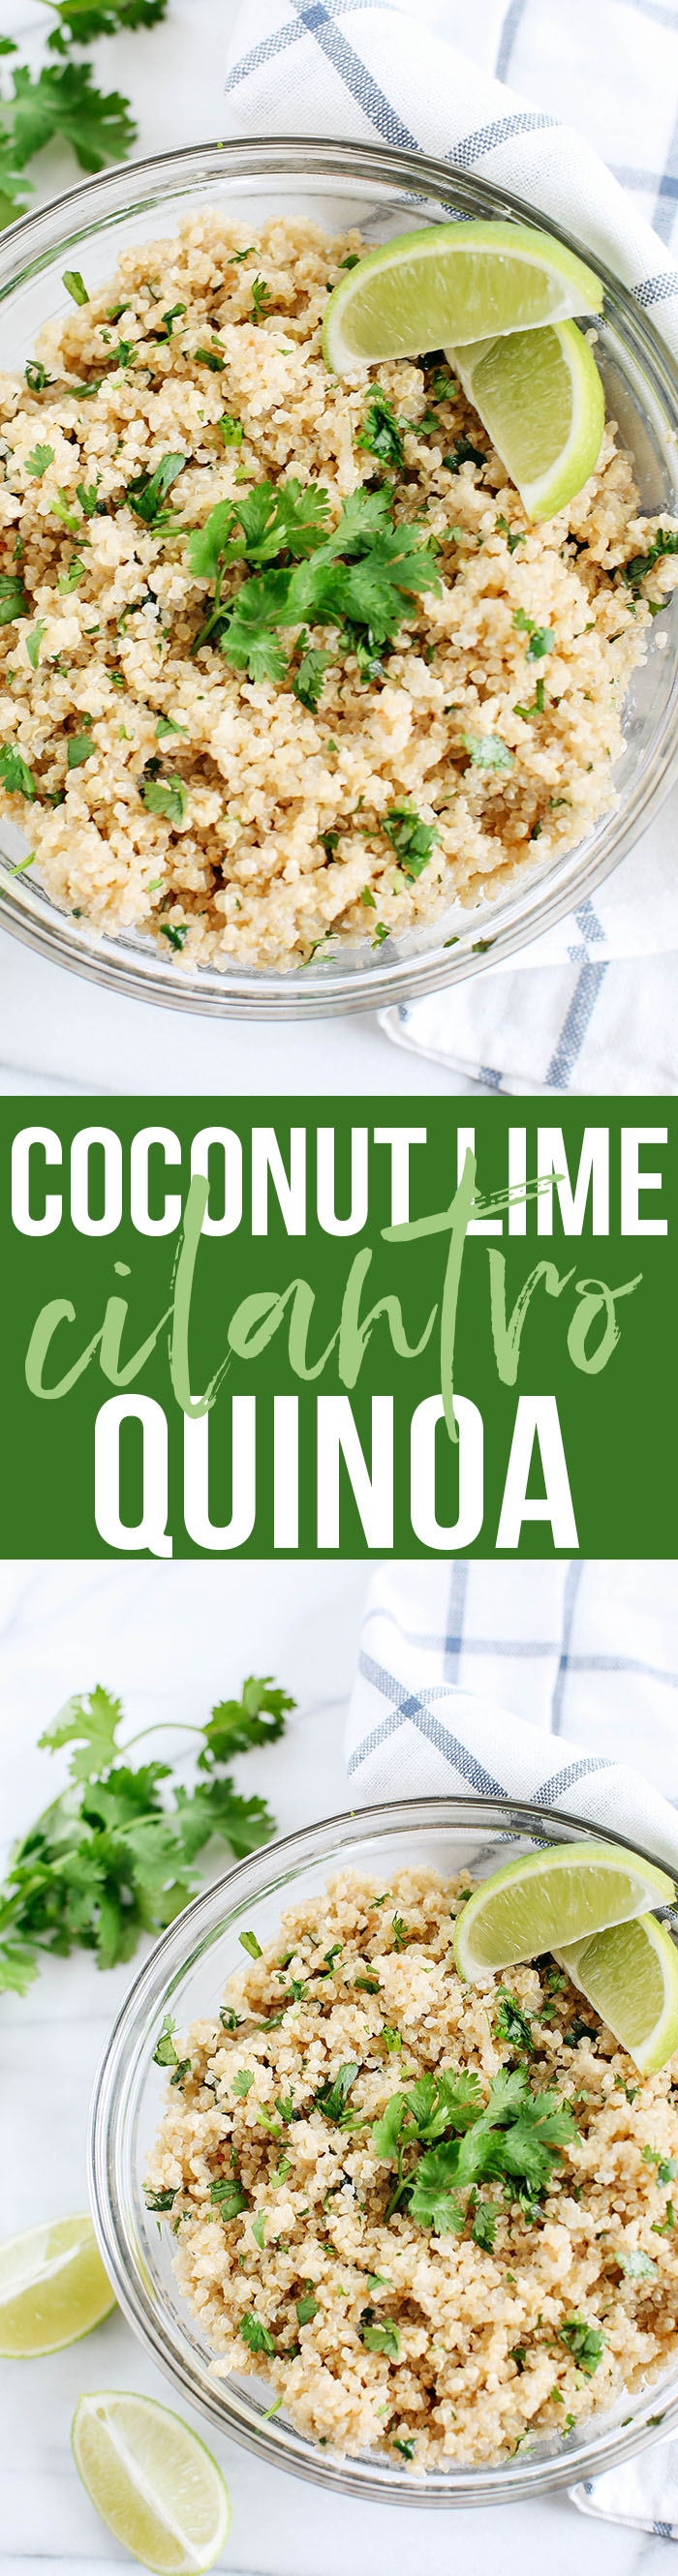 This Coconut Lime Cilantro Quinoa is easily made with just a few simple ingredients and makes the perfect healthy side dish to any meal!